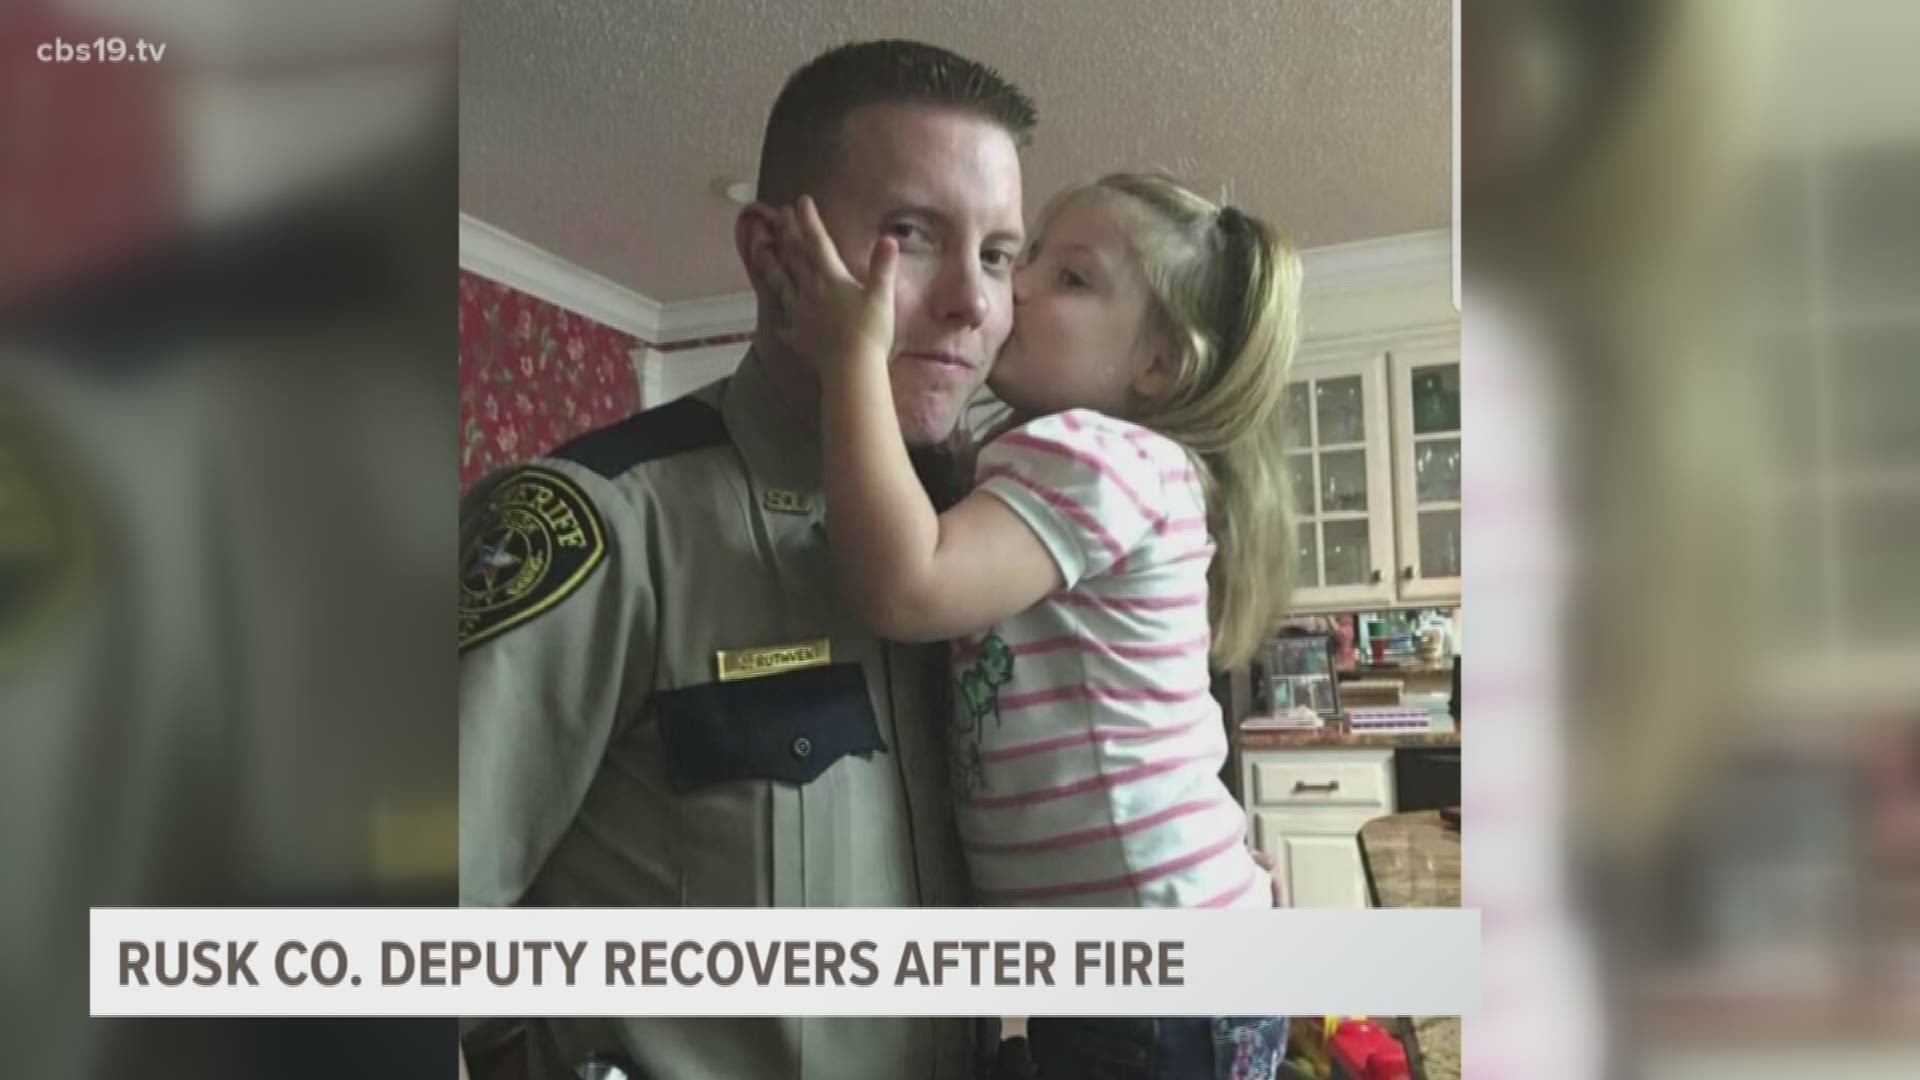 A Rusk Co. Sheriff's Deputy is rebuilding with the help of his community, after a fire took everything he owned.